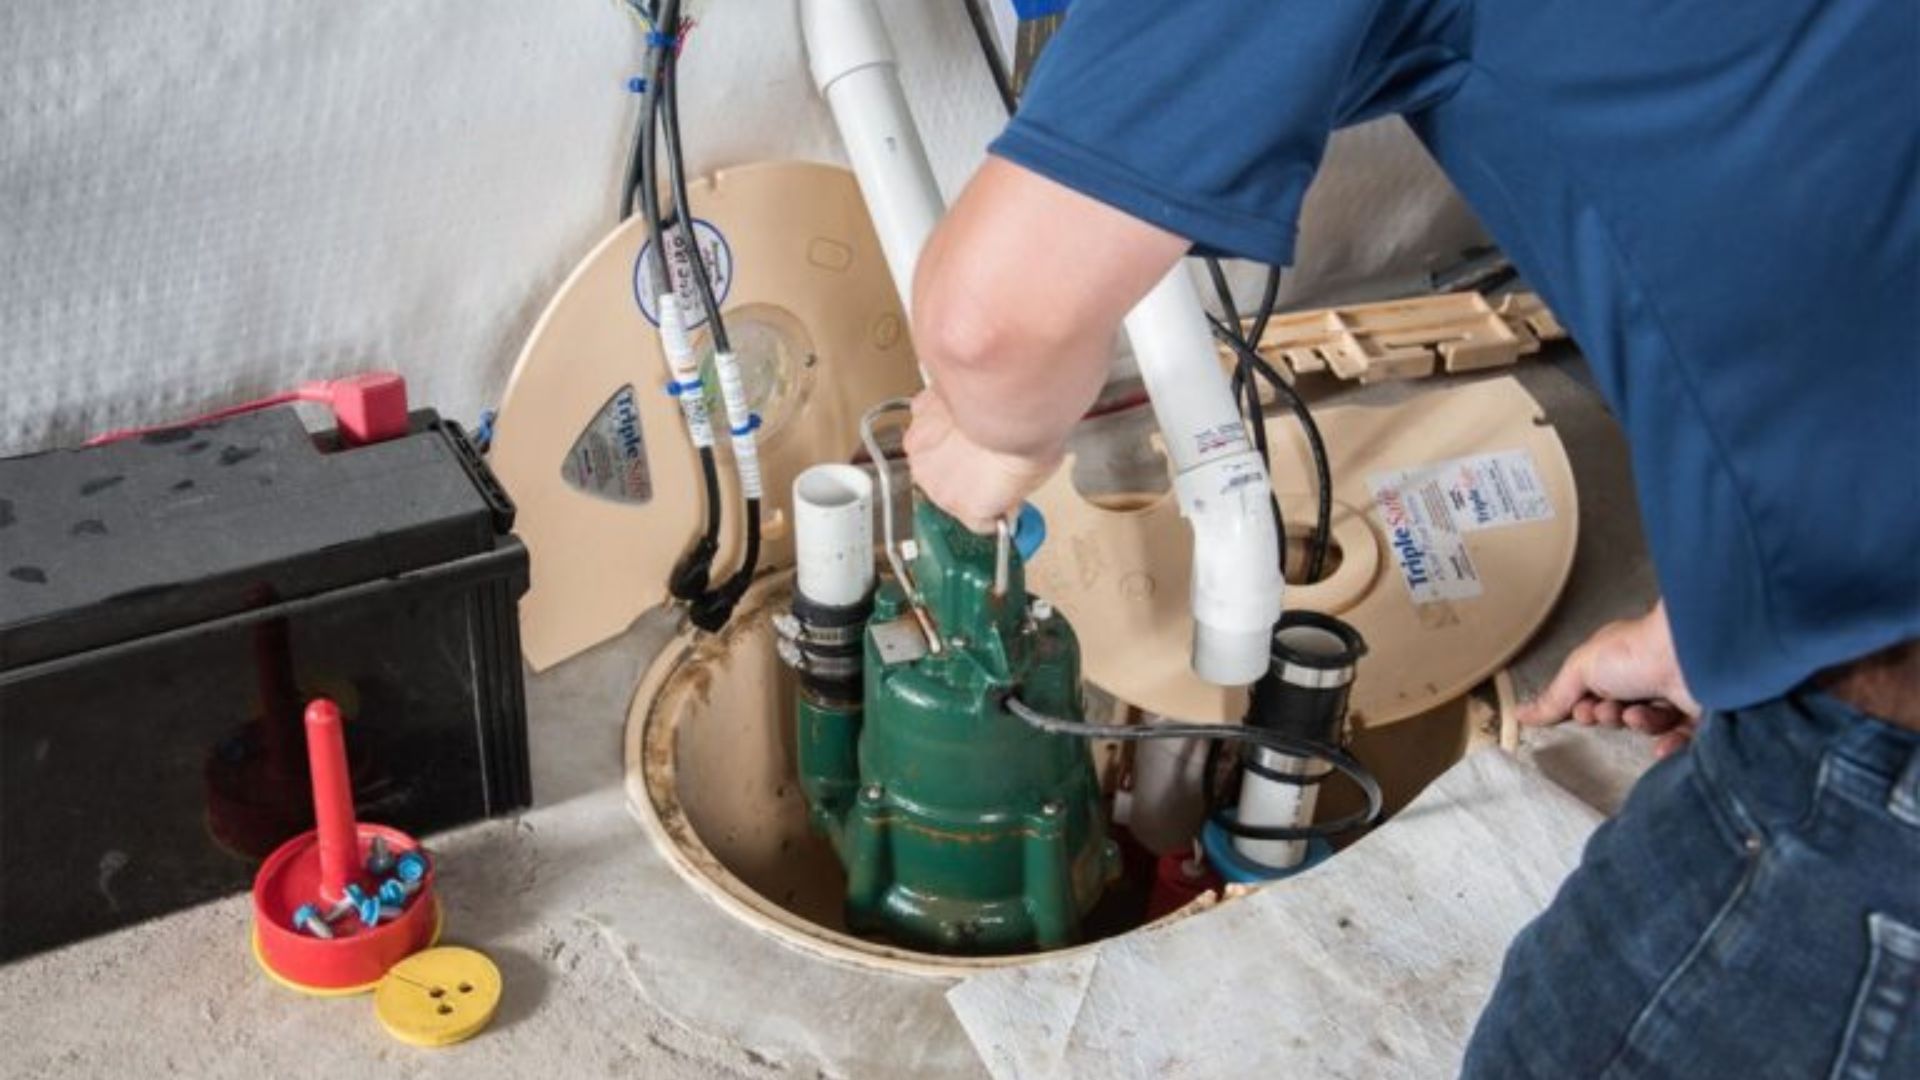 Professional Plumbers for New Sump Pump Installations